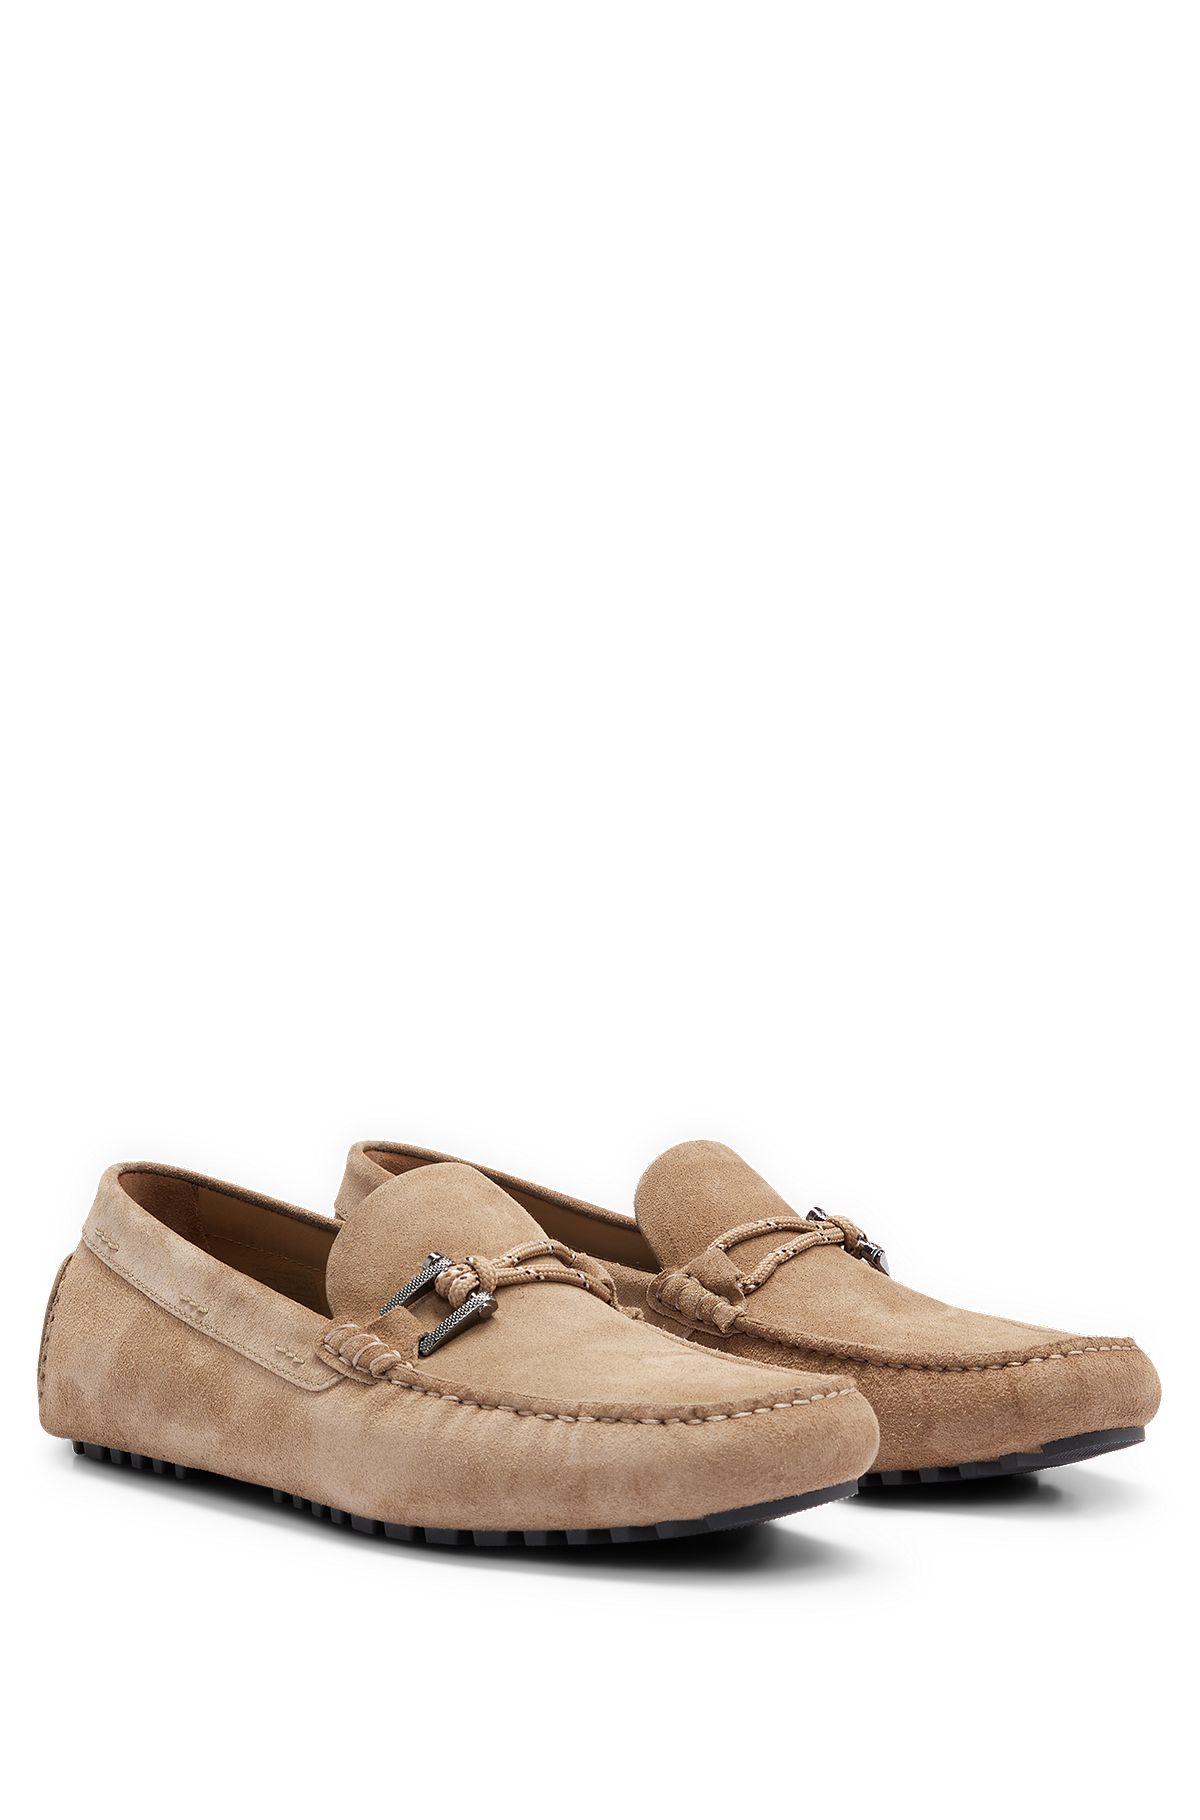 Driver moccasins in suede with cord and hardware details, Beige